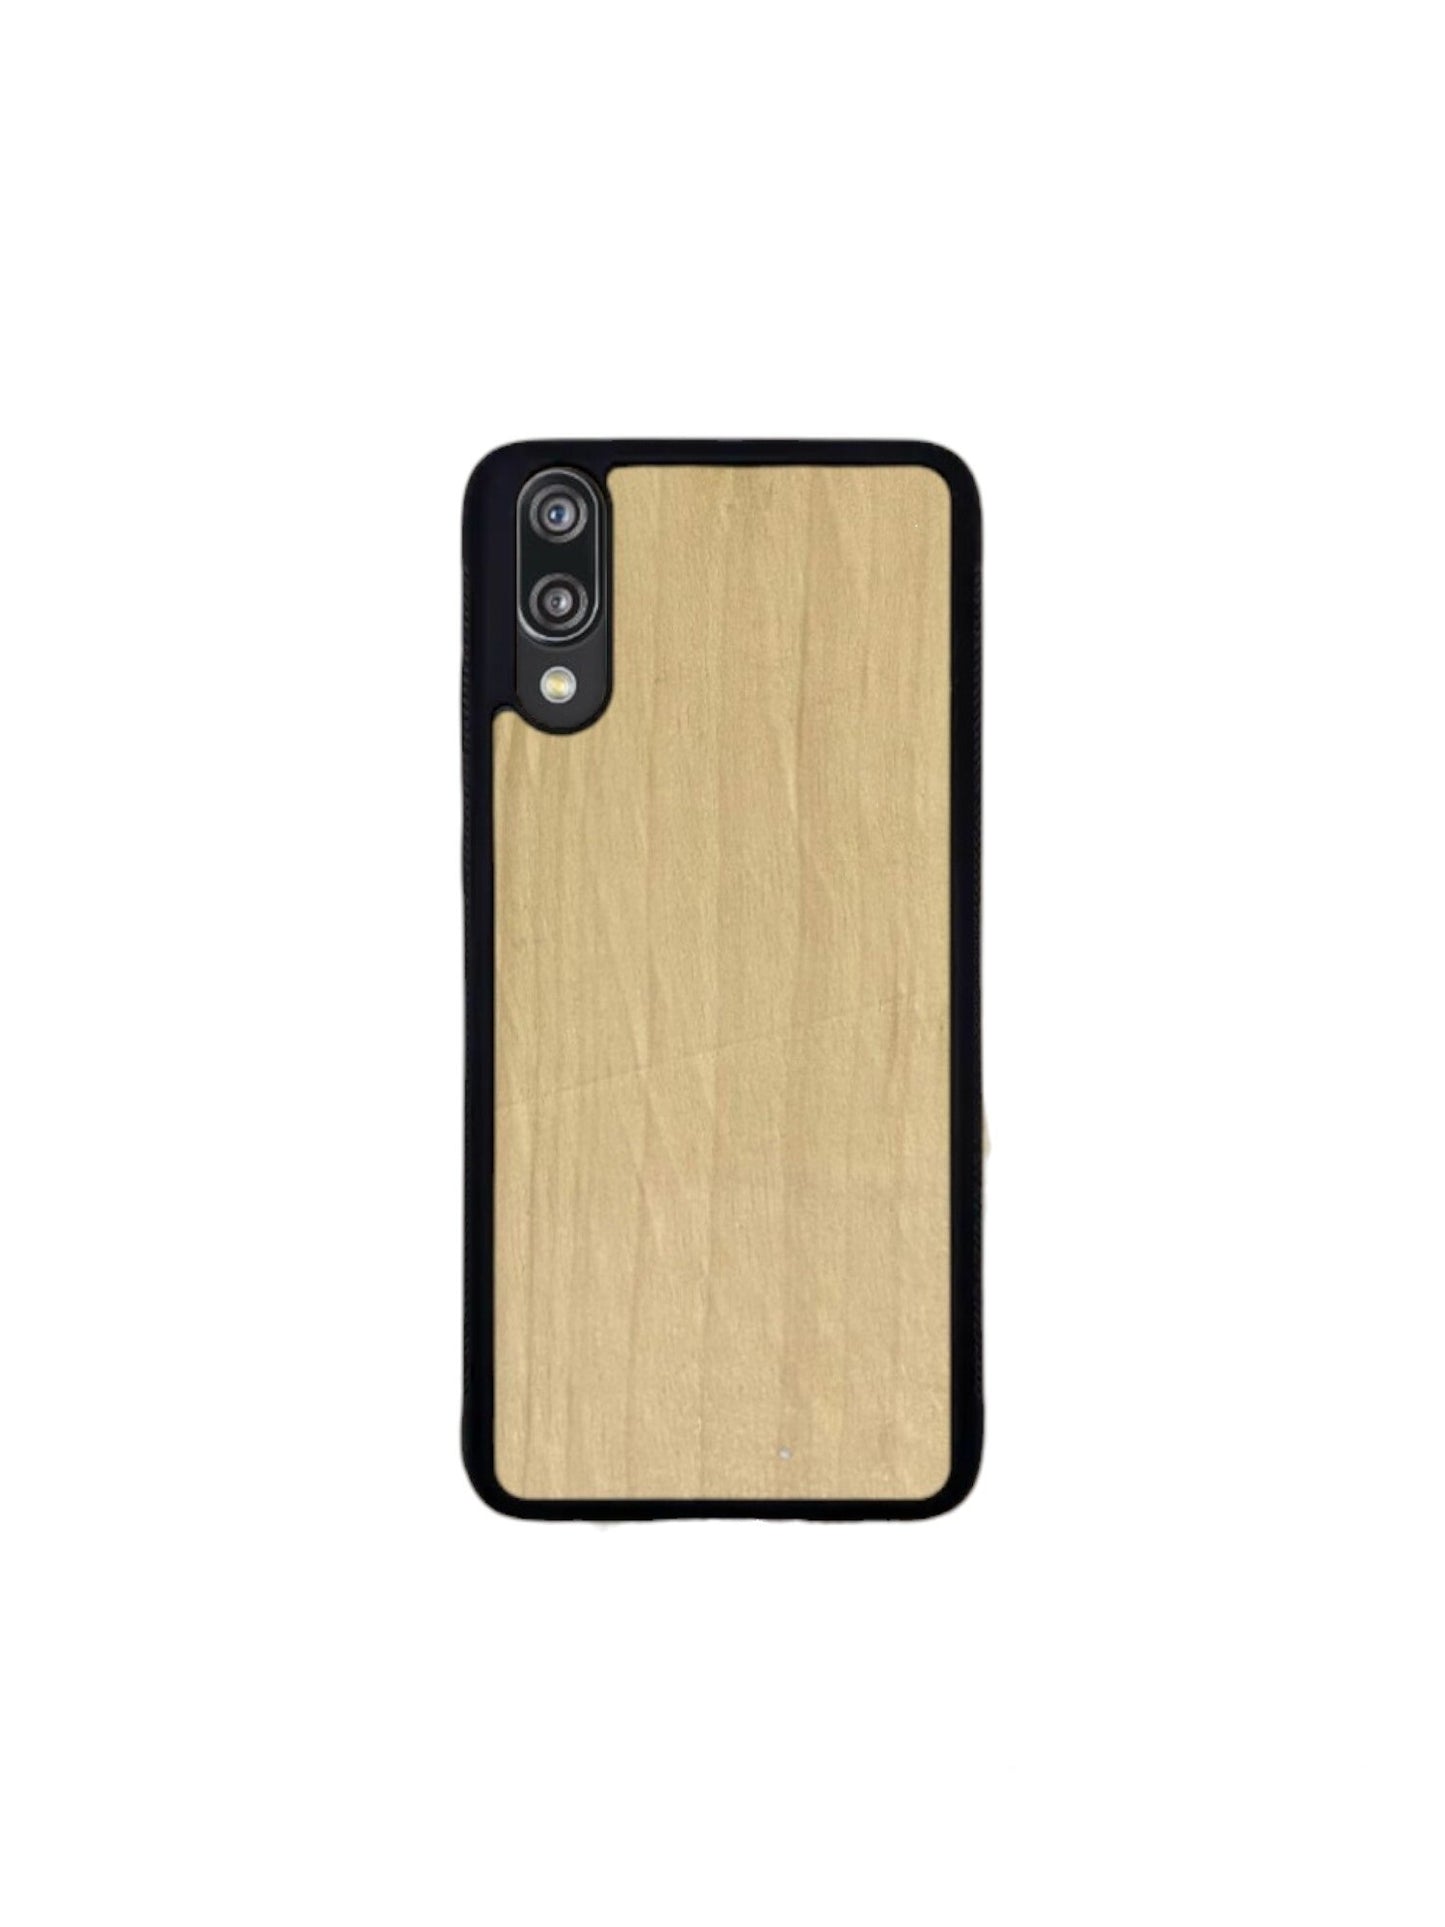 Huawei P case - The simple one